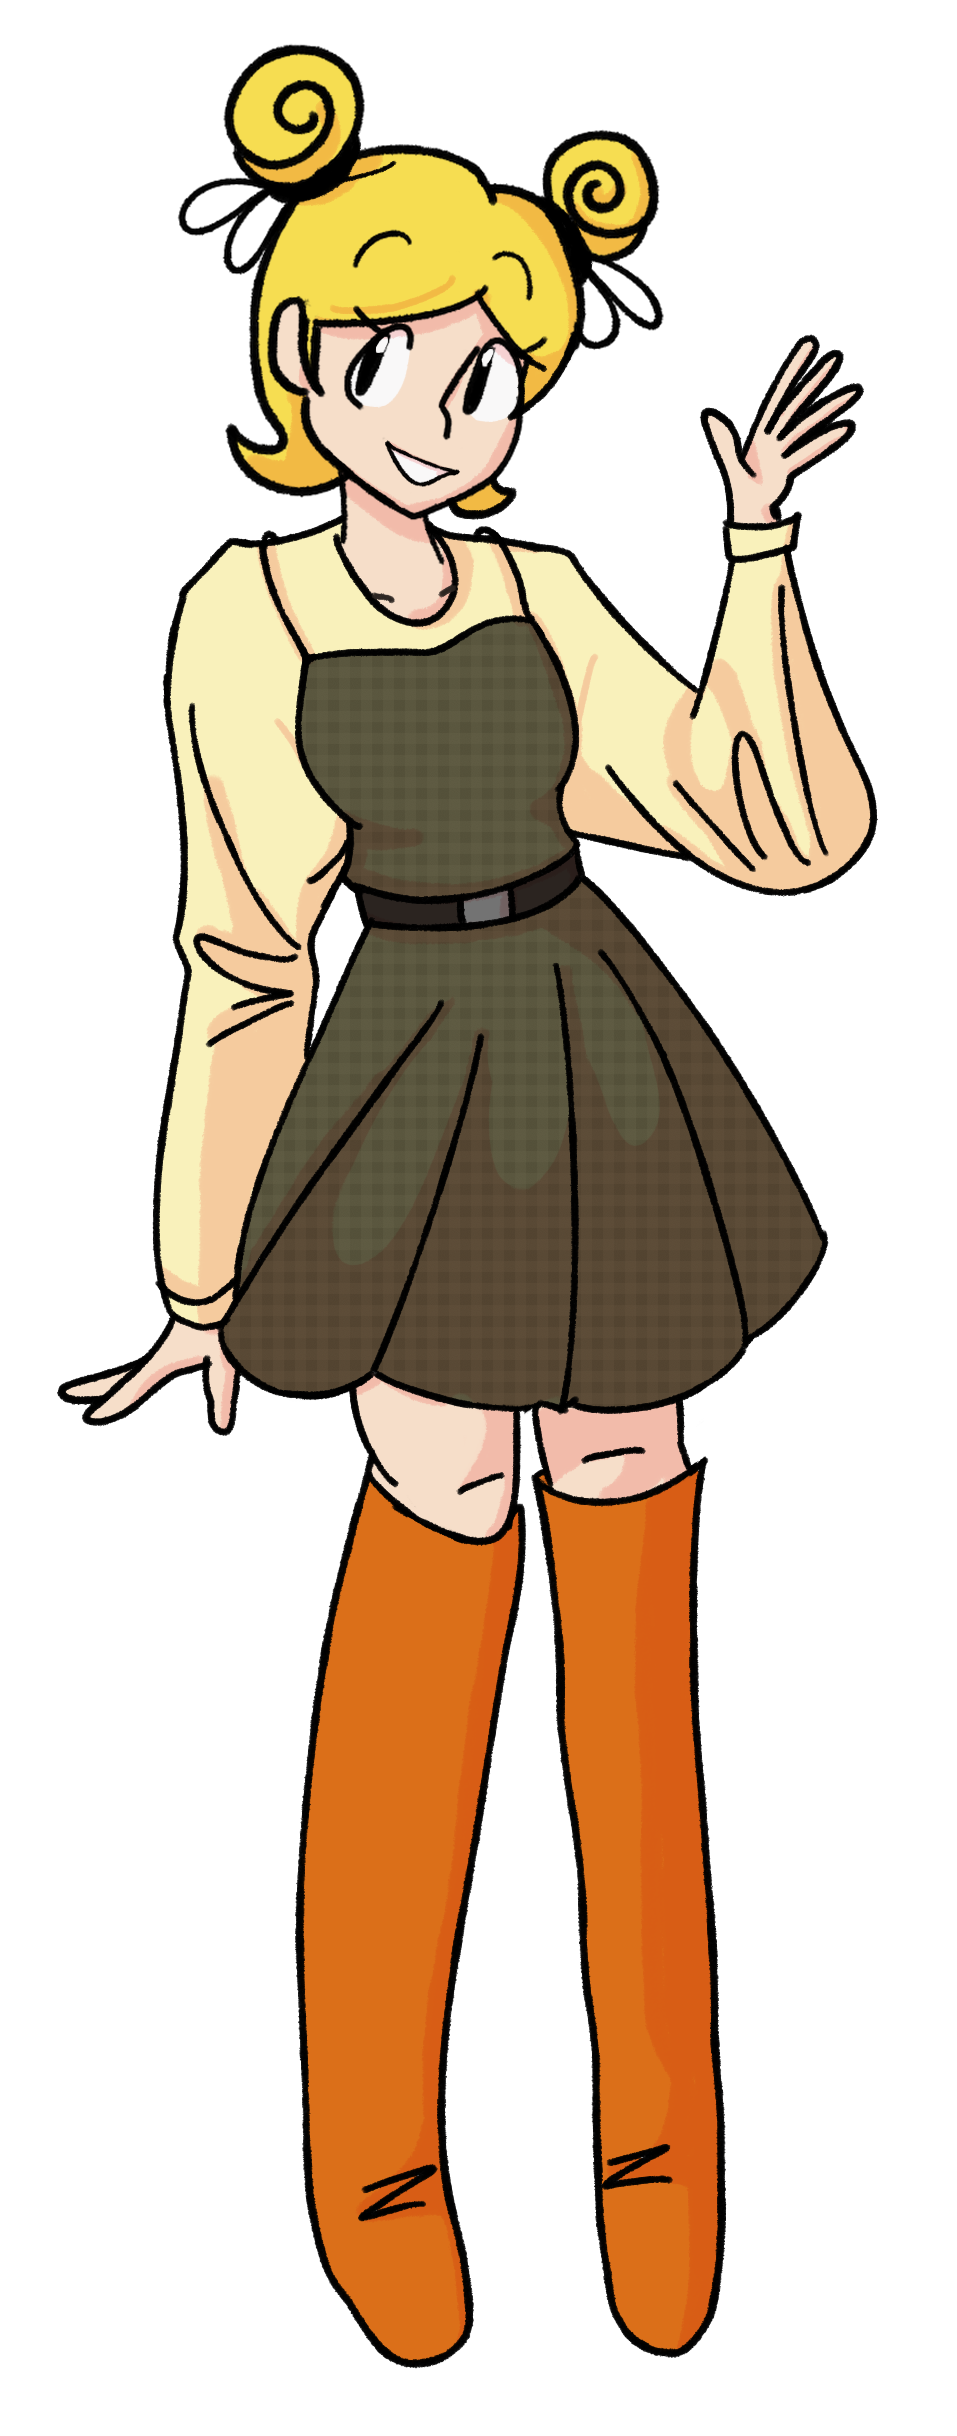 A large-scale artwork depicting a human of Japanese enthnicity named Mikachu. She is in her early 20's, and has short blonde hair tied up into twin buns. Her skin is pale, and she has black, rounded anime-like eyes. She wears a cream long-sleeve shirt with dolman sleeves, and a brown plaid summer dress over the top. In the middle of her dress is a black belt with a silver buckle. Her dress ends in a pleated style above her knees, and she wears long, orange, sock-like boots that reach to just below her knees.